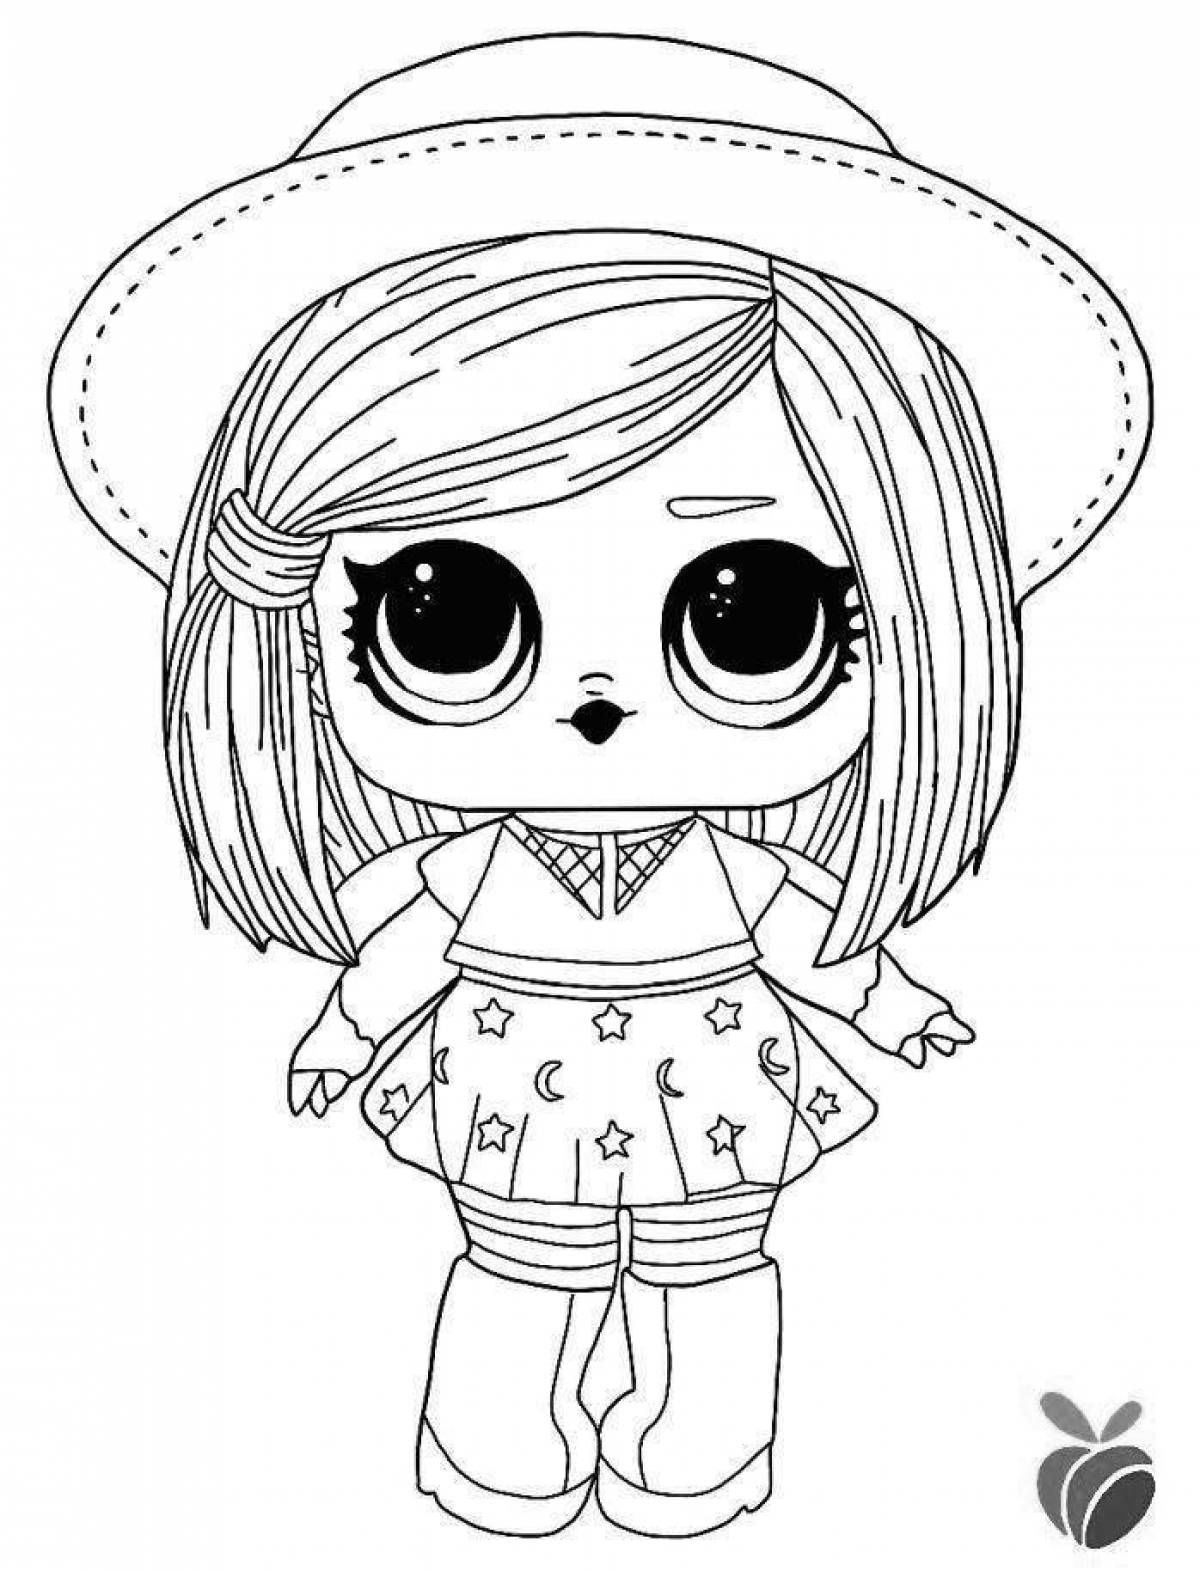 Gorgeous lol doll coloring book for kids 5-6 years old